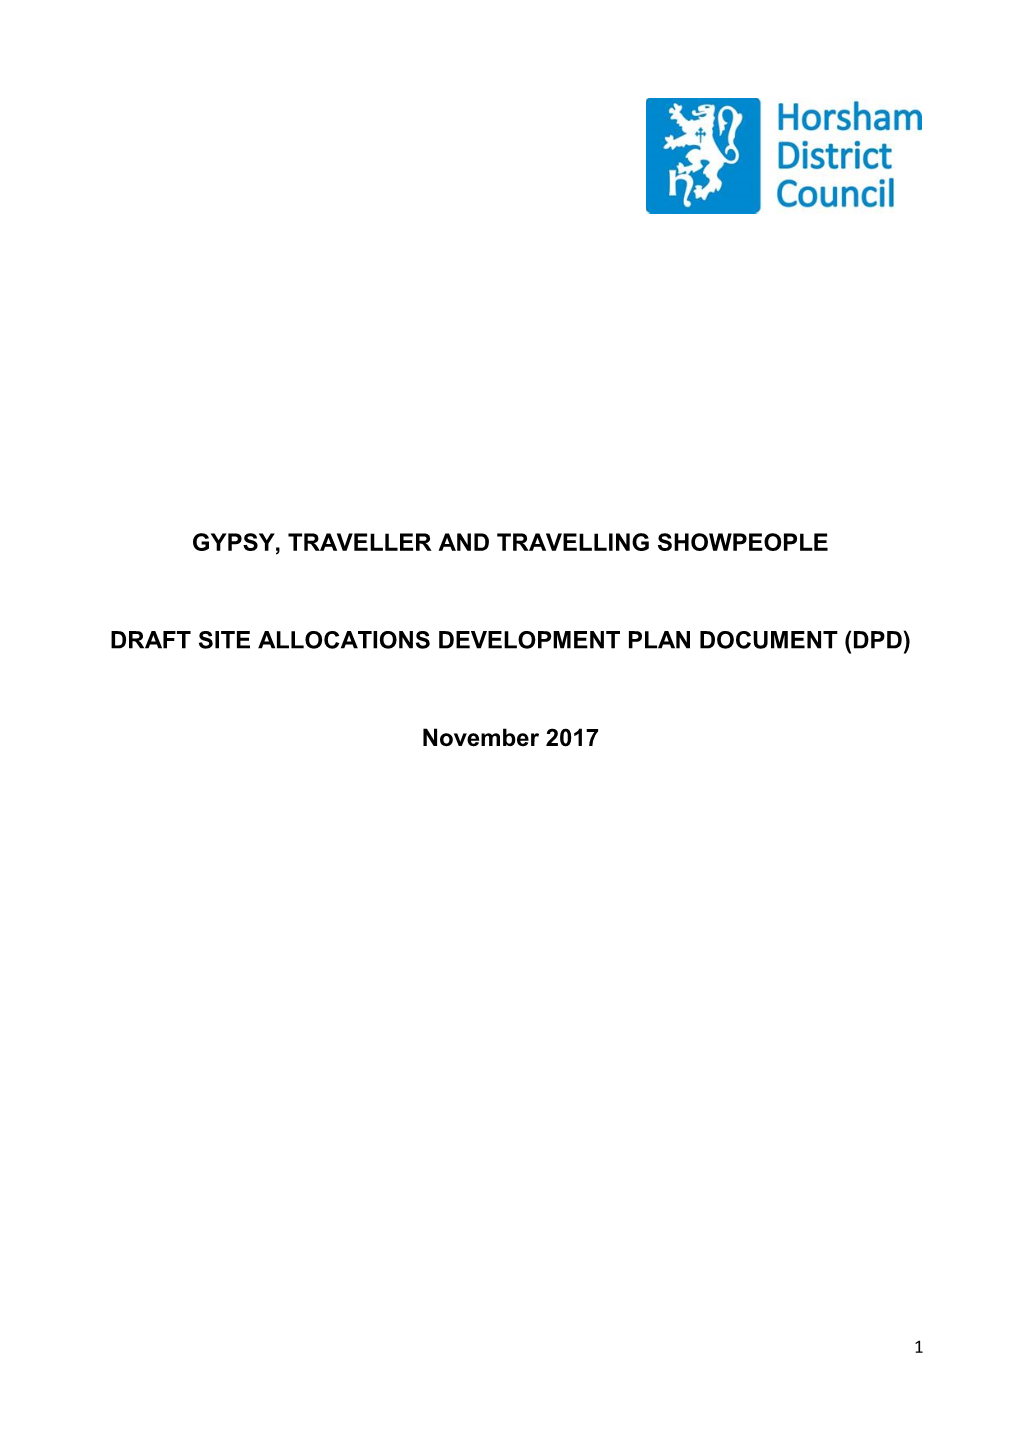 GYPSY, TRAVELLER and TRAVELLING SHOWPEOPLE DRAFT SITE ALLOCATIONS DEVELOPMENT PLAN DOCUMENT (DPD) November 2017